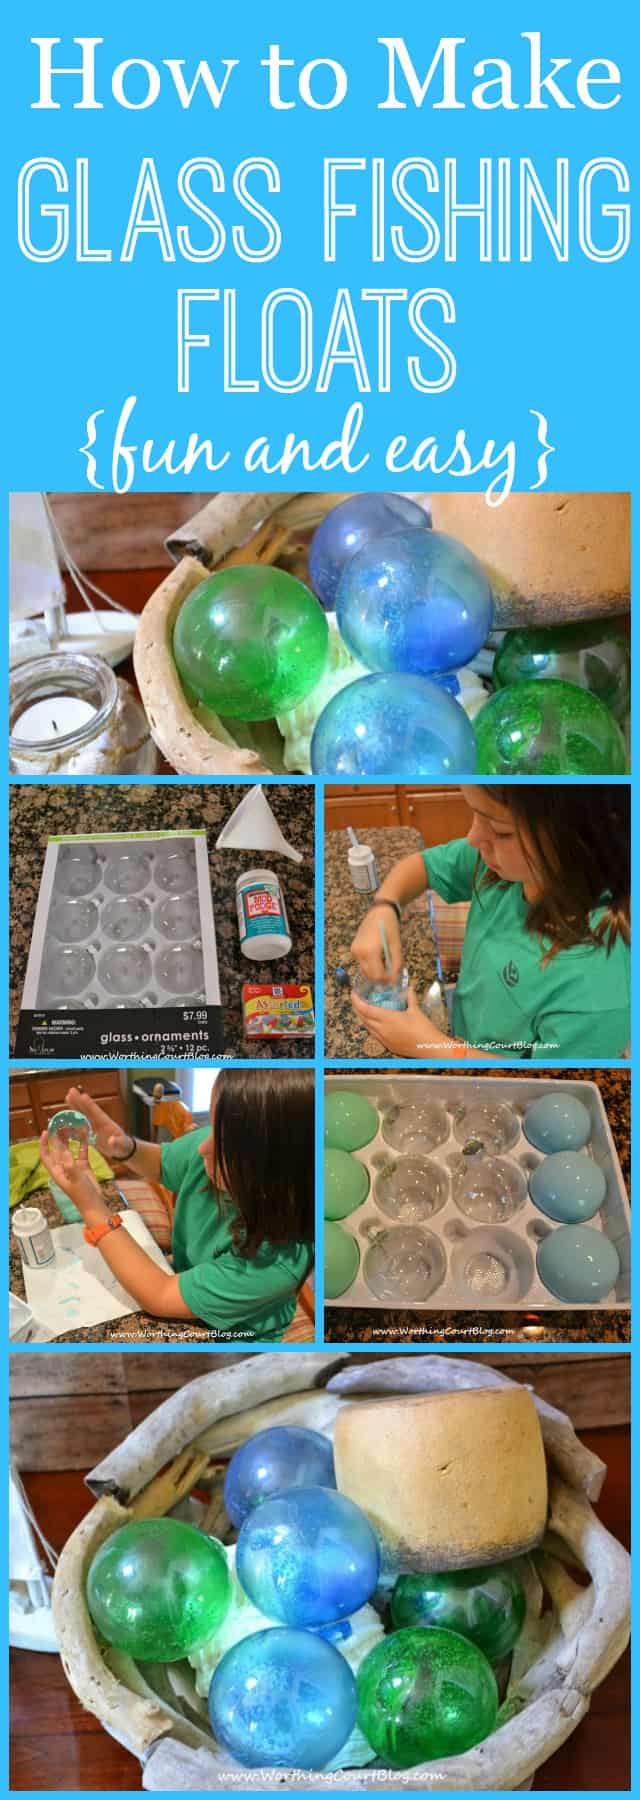 How to make glass fishing floats. Fun and easy!